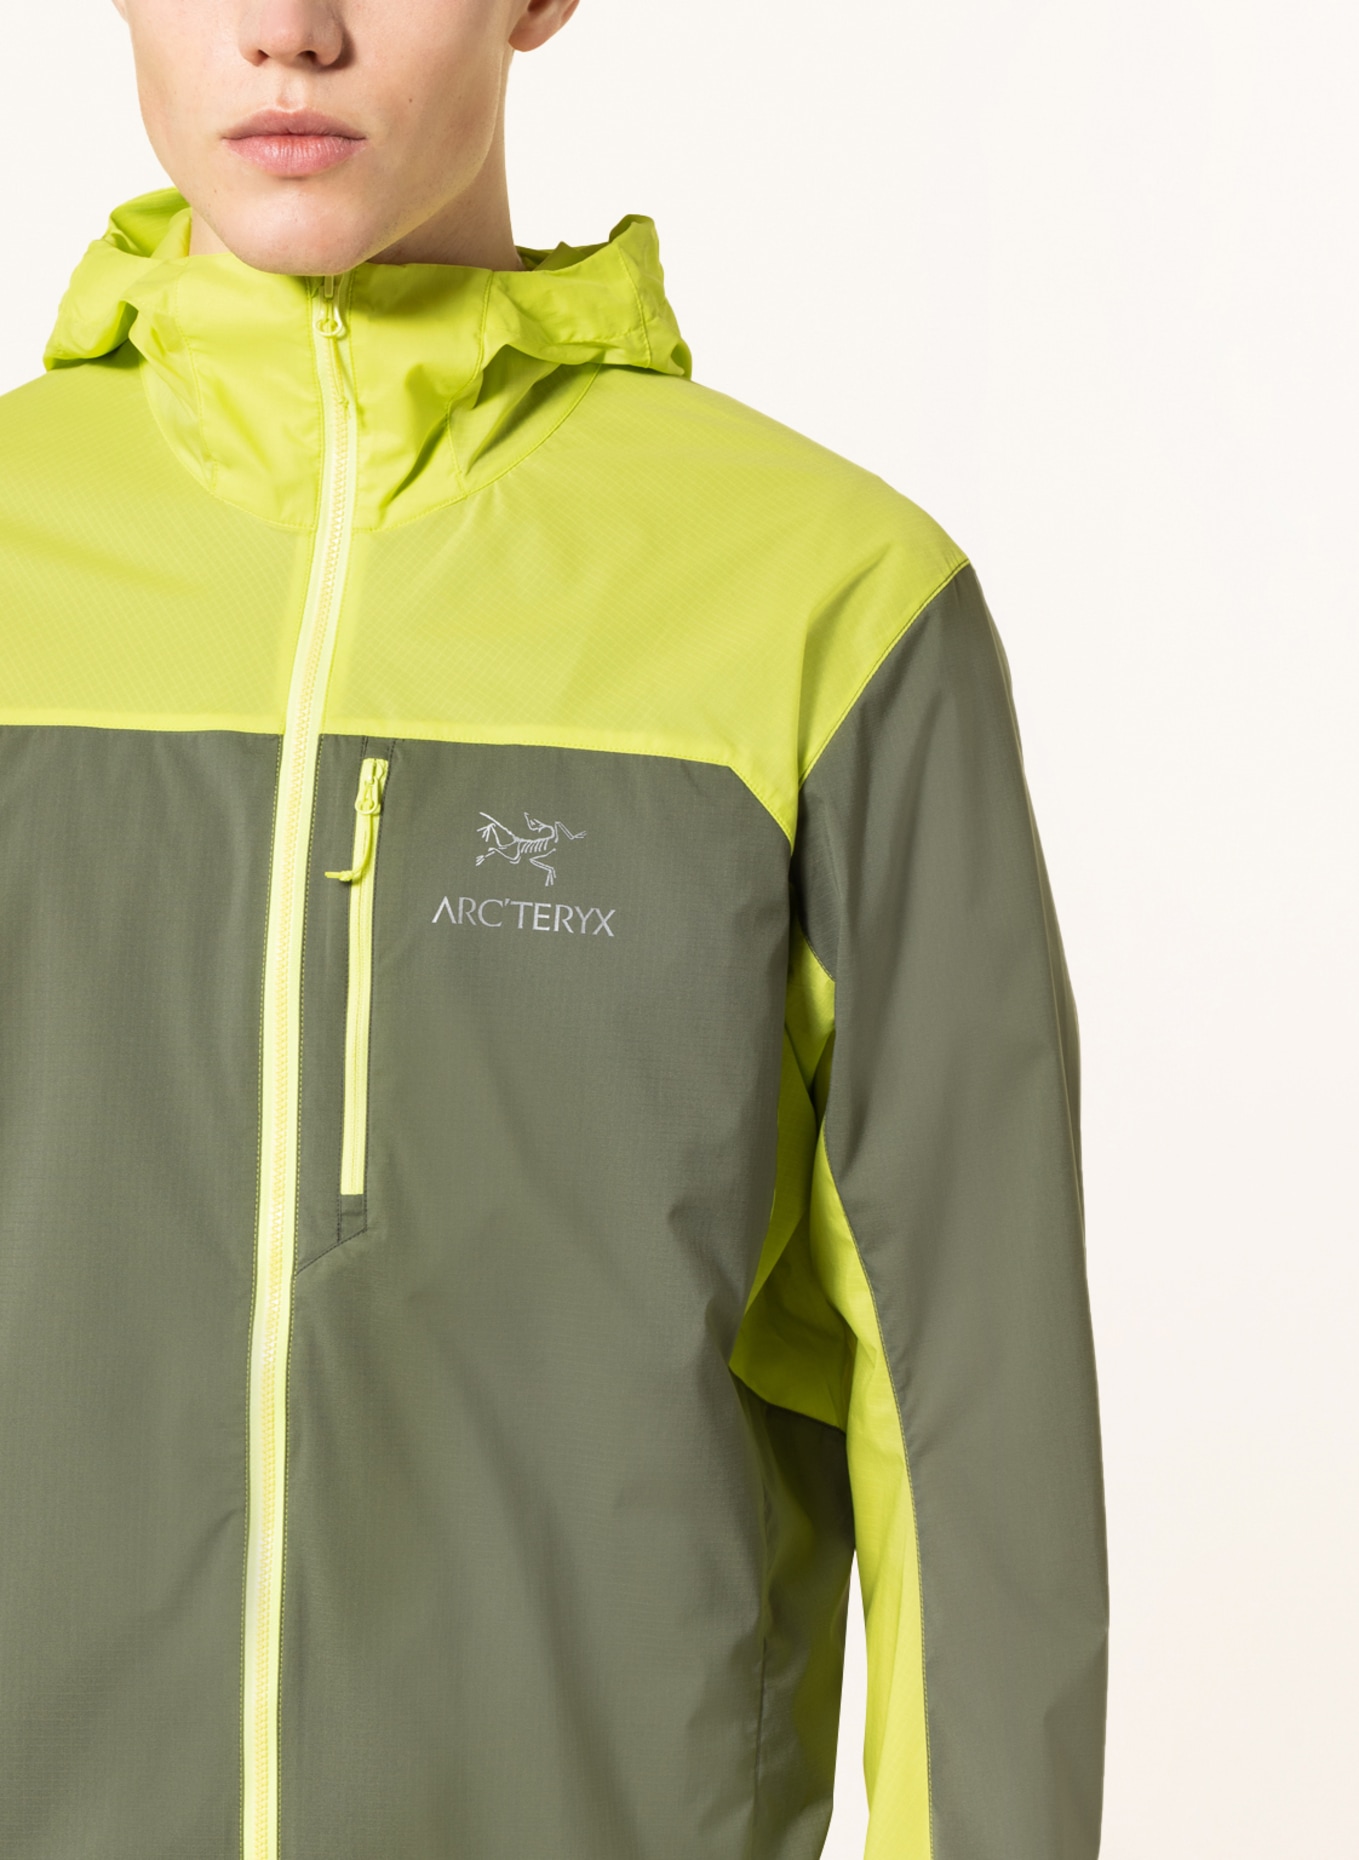 ARC'TERYX Outdoor jacket SQUAMISH in light green/ olive